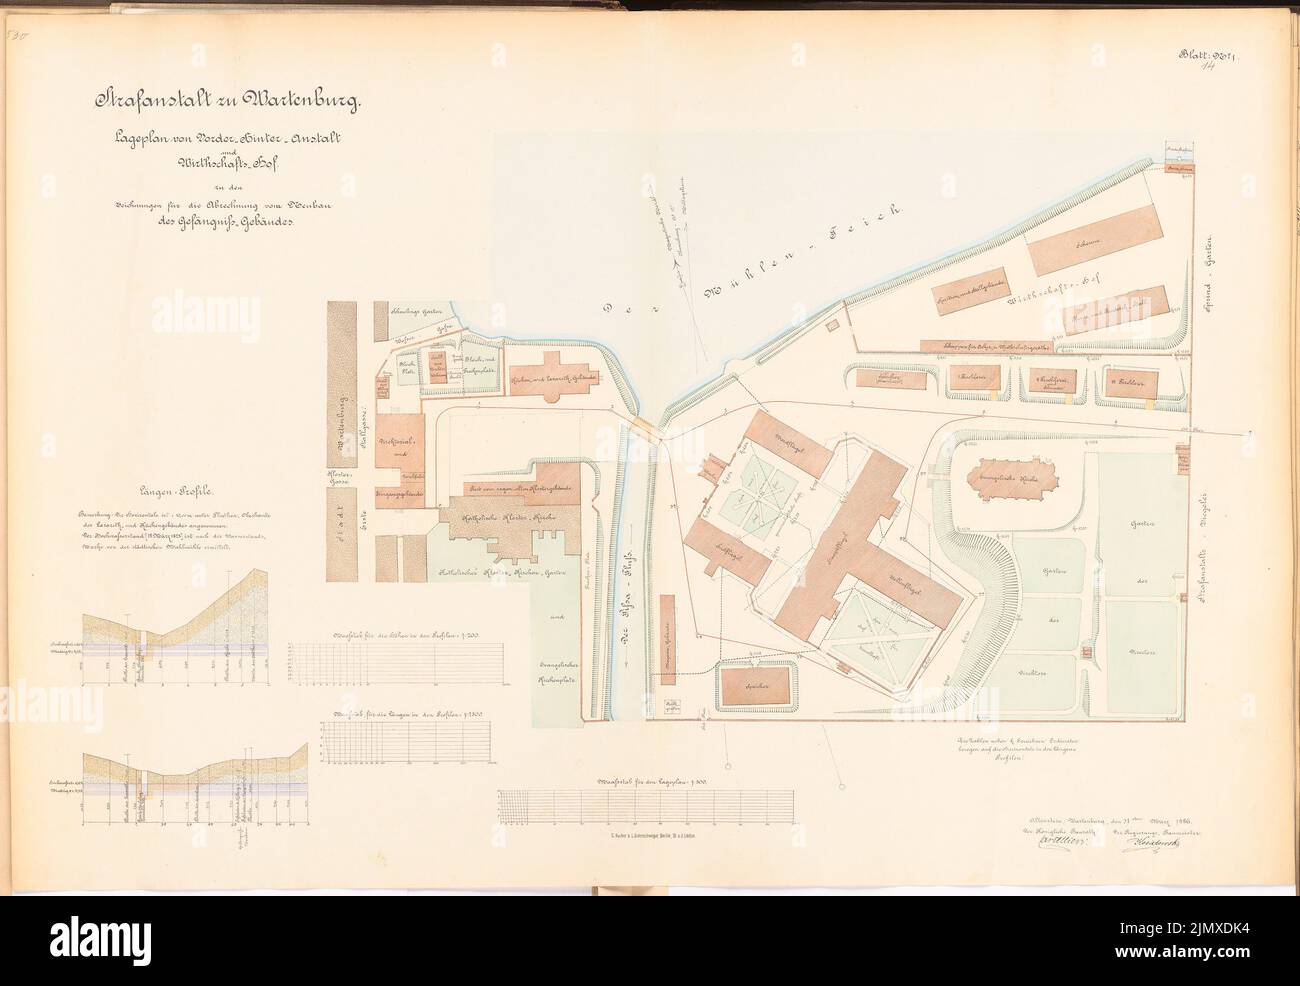 Unknown architect, prison in Wartenburg (approx. 1886/1887): Plan content N.N. detected. Lithography colored on paper, 66.7 x 96.7 cm (including scan edges) N.N. : Strafanstalt, Wartenburg Stock Photo